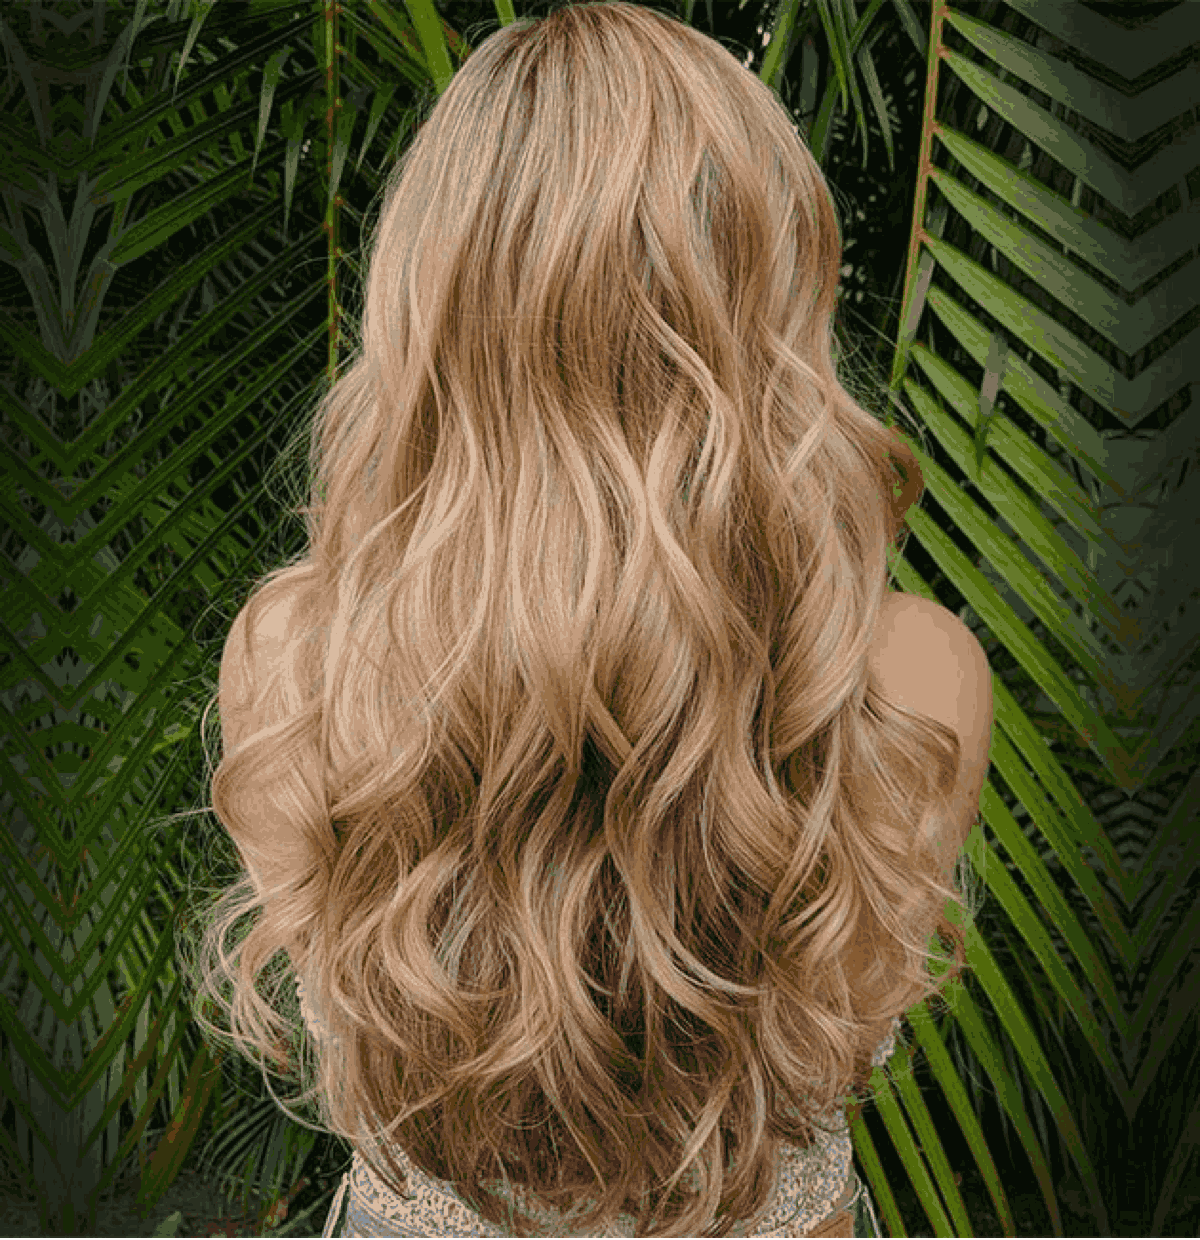 50 Honey Blonde Hair Ideas for Women in 2022 with Images